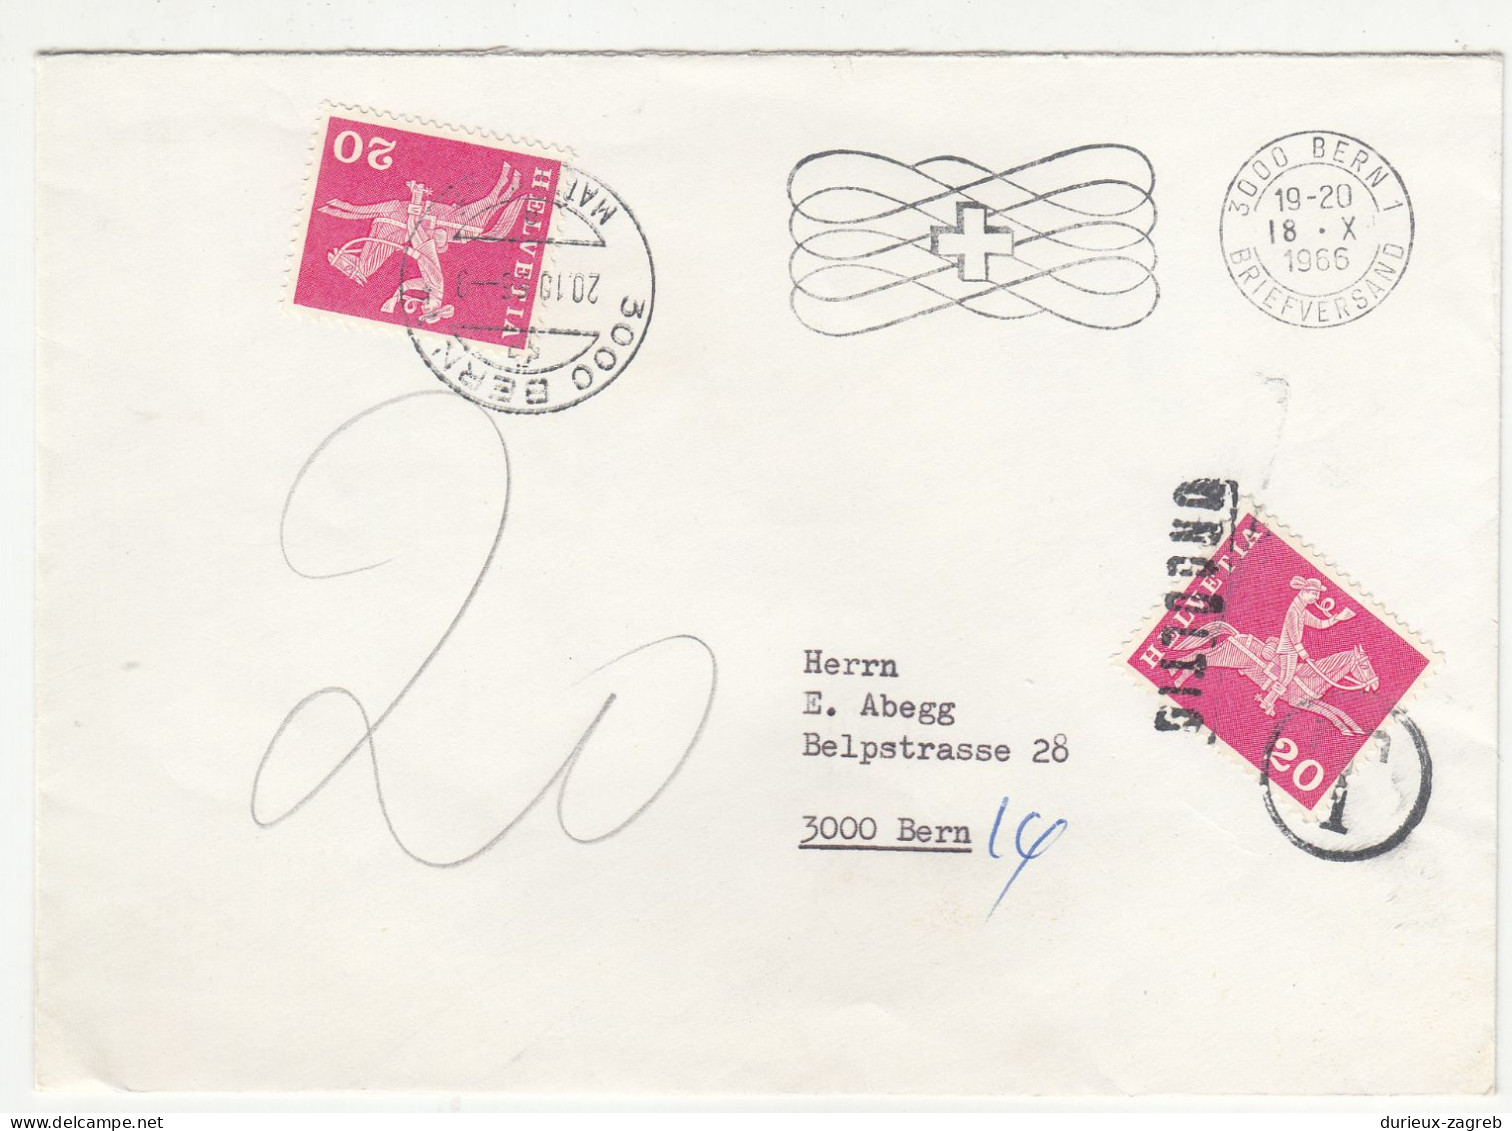 Switzerland Letter Cover Posted 1966 - Taxed Postage Due Switzerland Ordinary Stamp B240510 - Postage Due